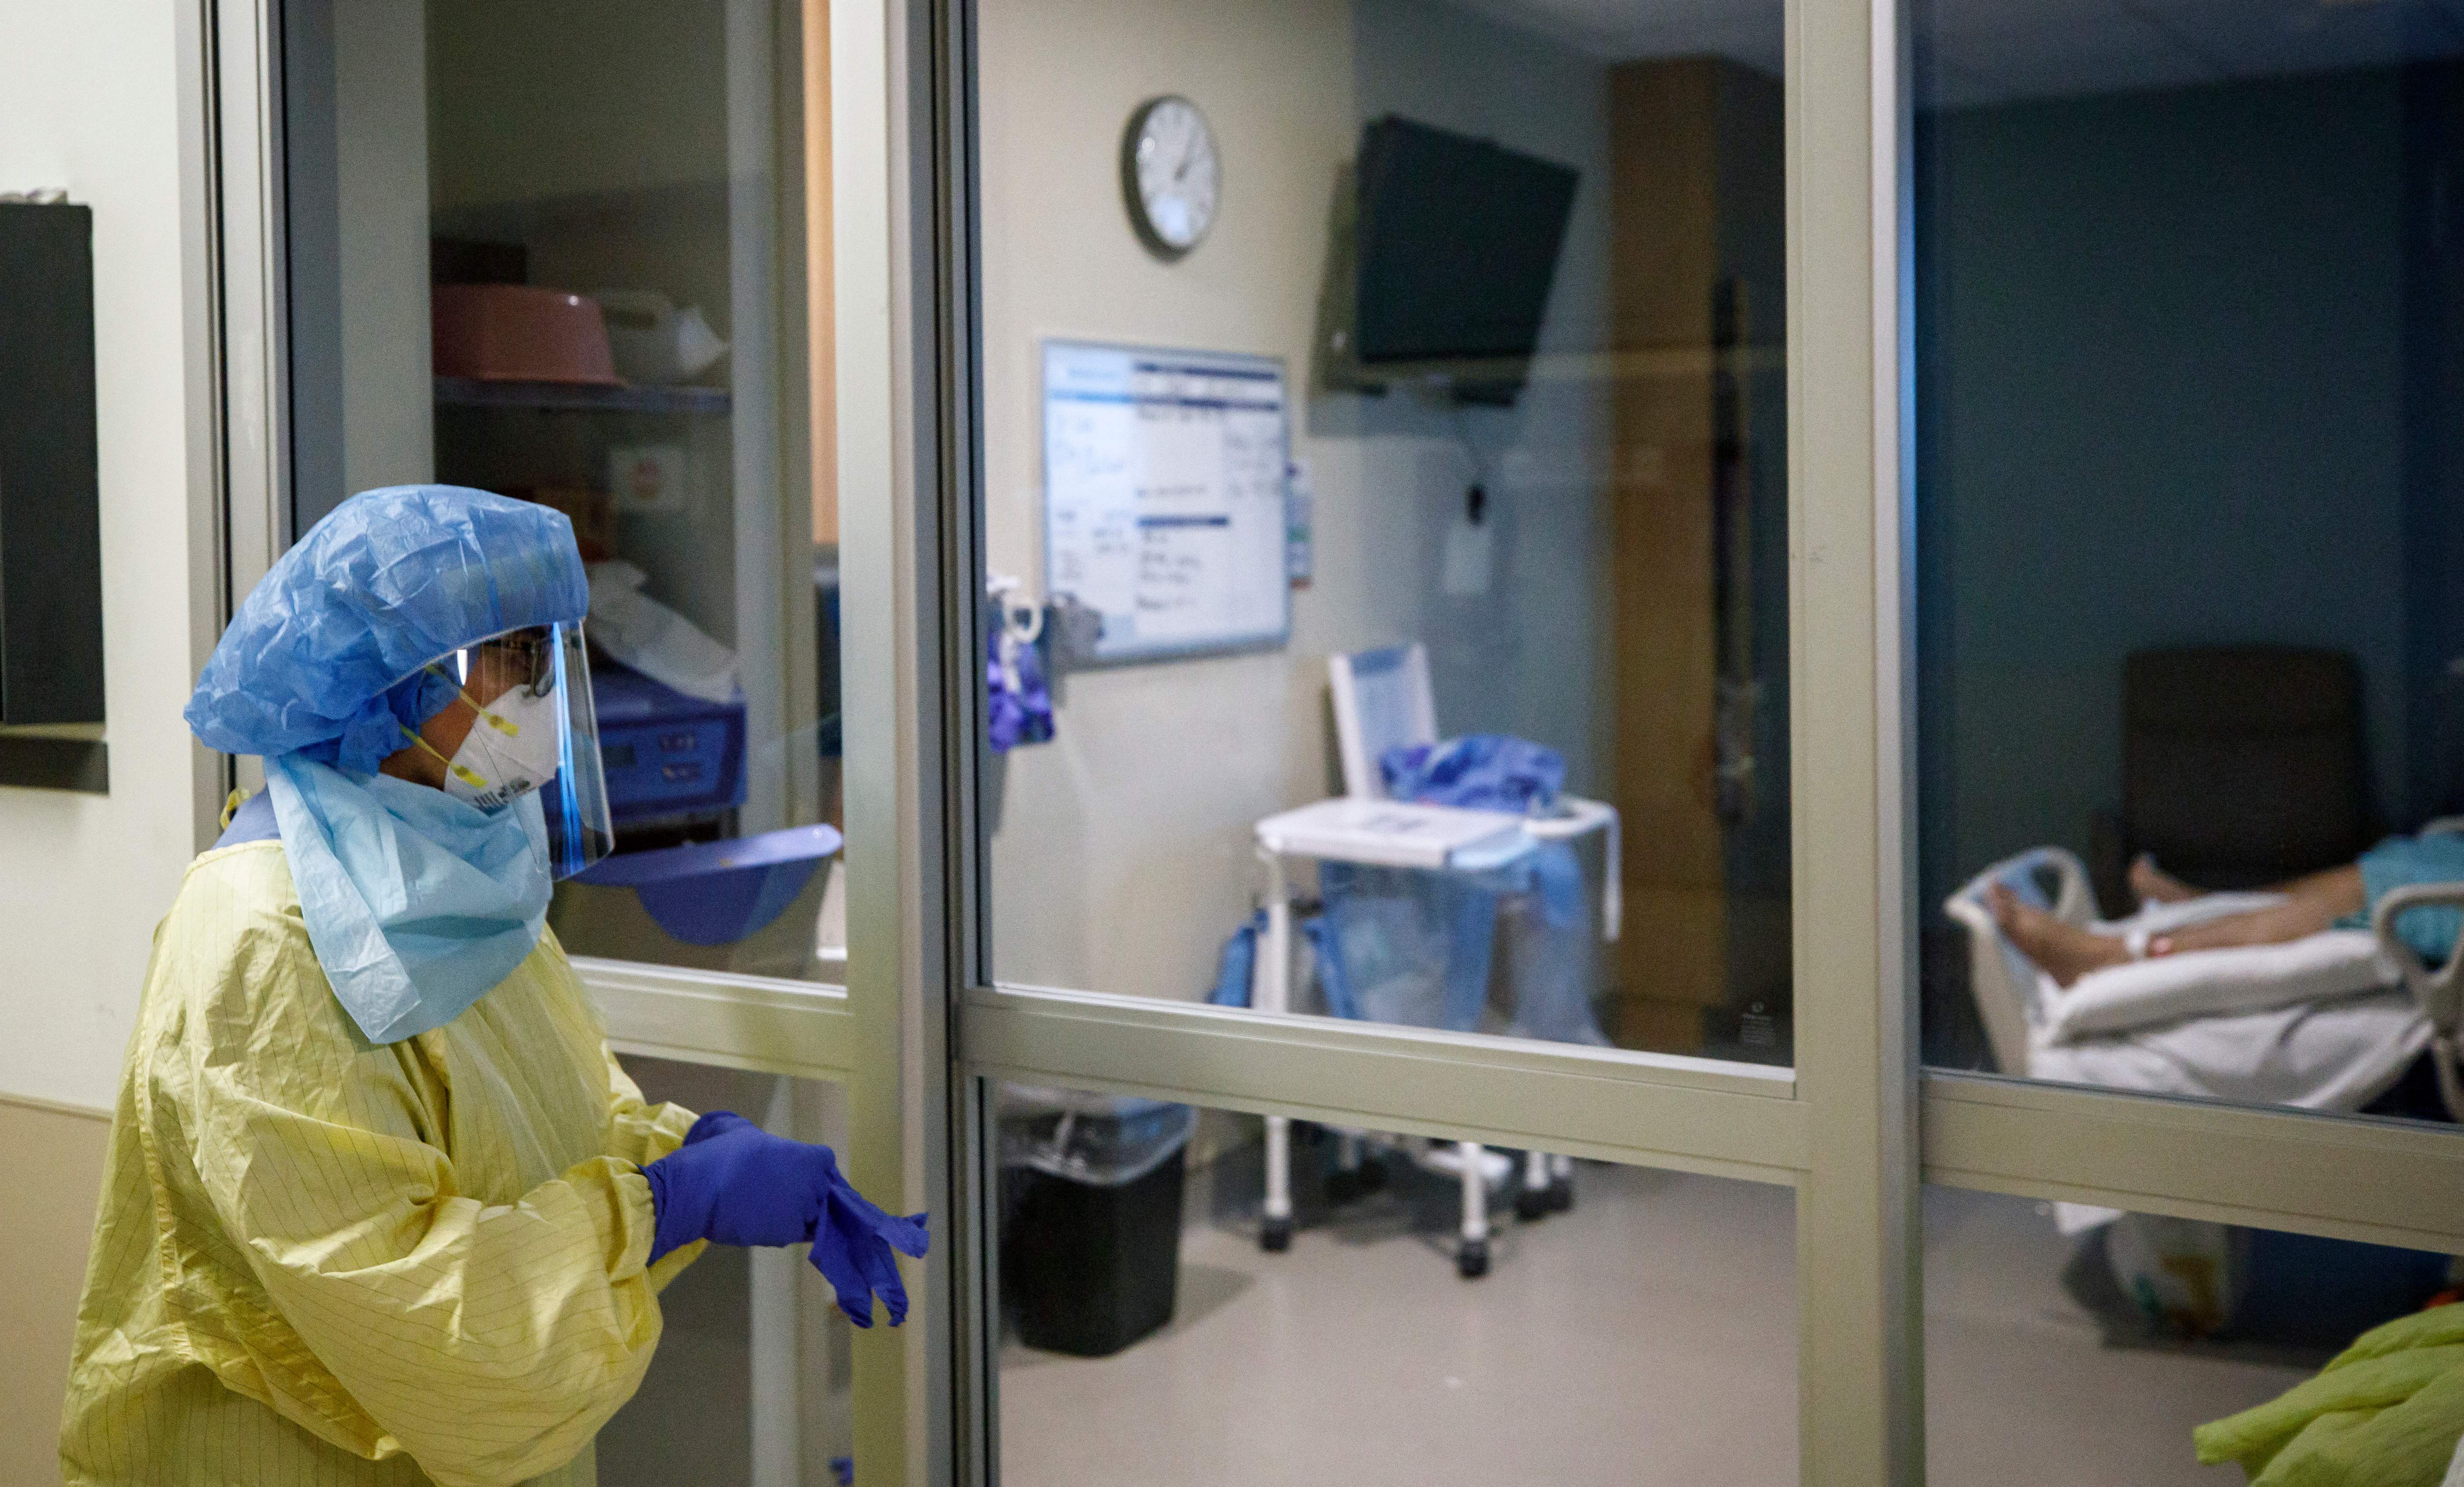 Representative: A healthcare worker looks into transfer a patient from Humber River Hospital's Intensive Care Unit to a waiting air ambulance as the hospital frees up space In their ICU unit, in Toronto, Ontario, Canada, on 28 April 2021